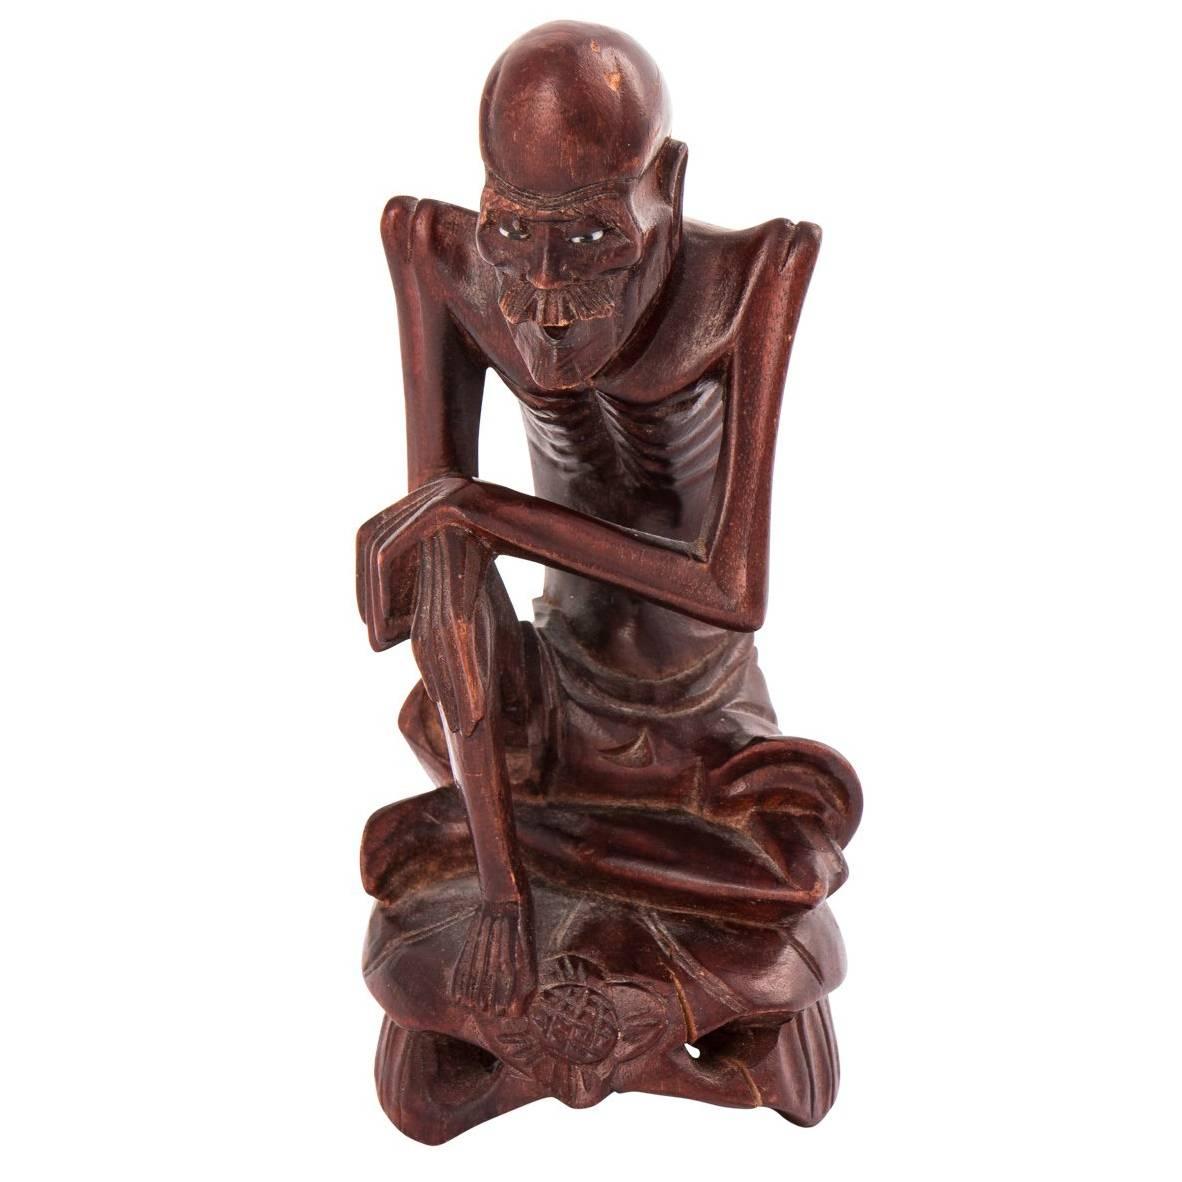 Wood Carving of Old Man For Sale